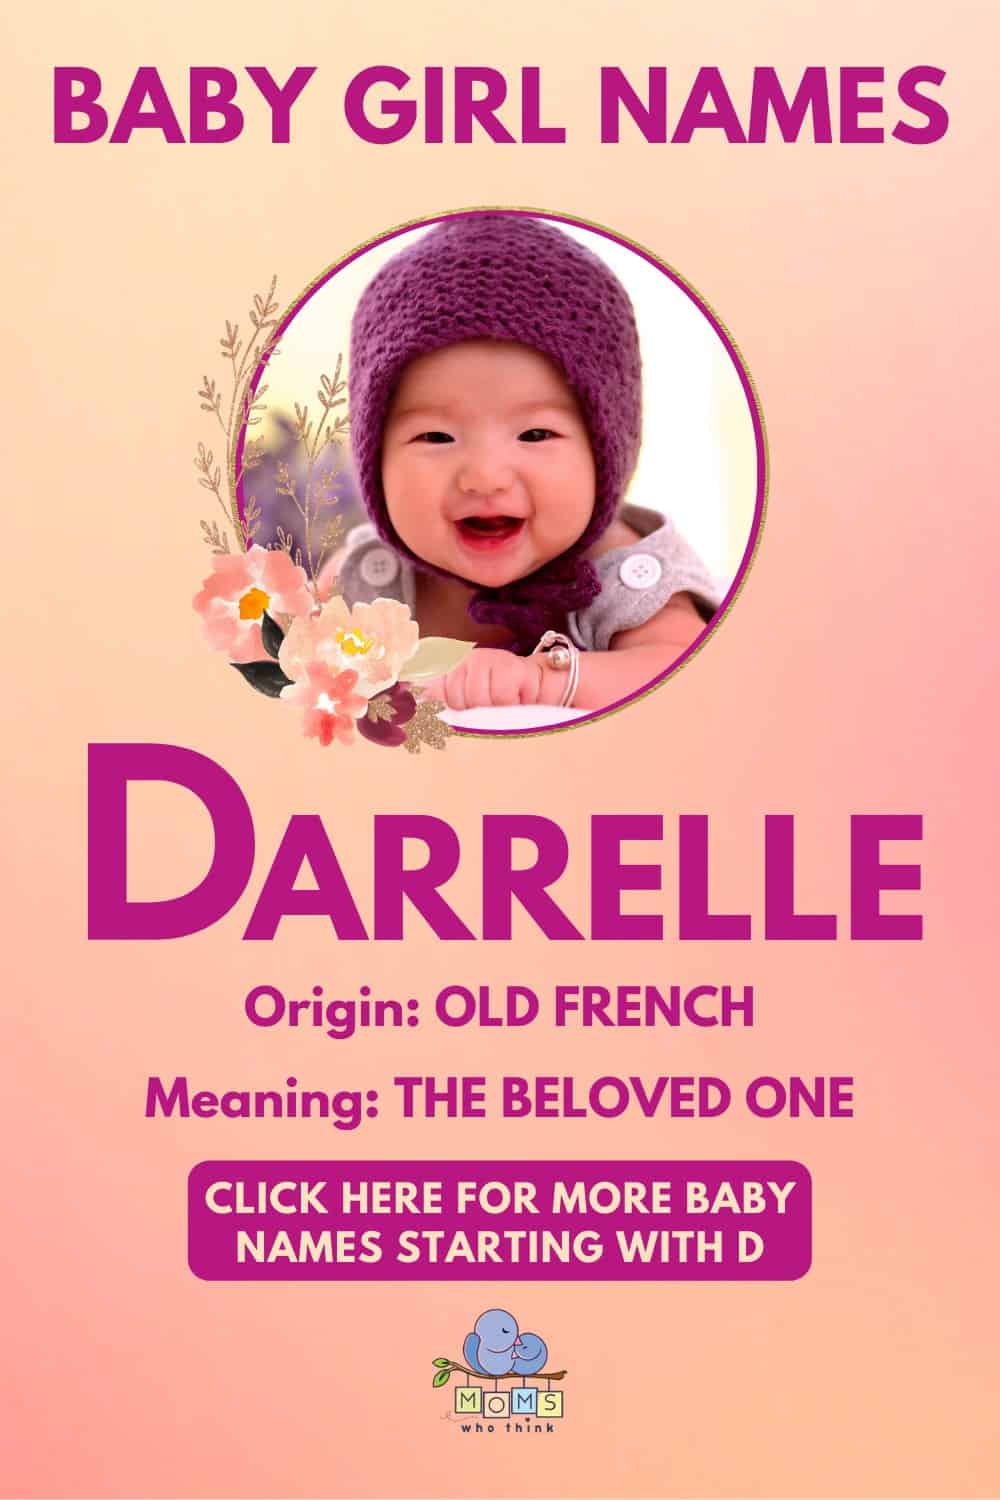 Baby girl name meanings - Darrelle